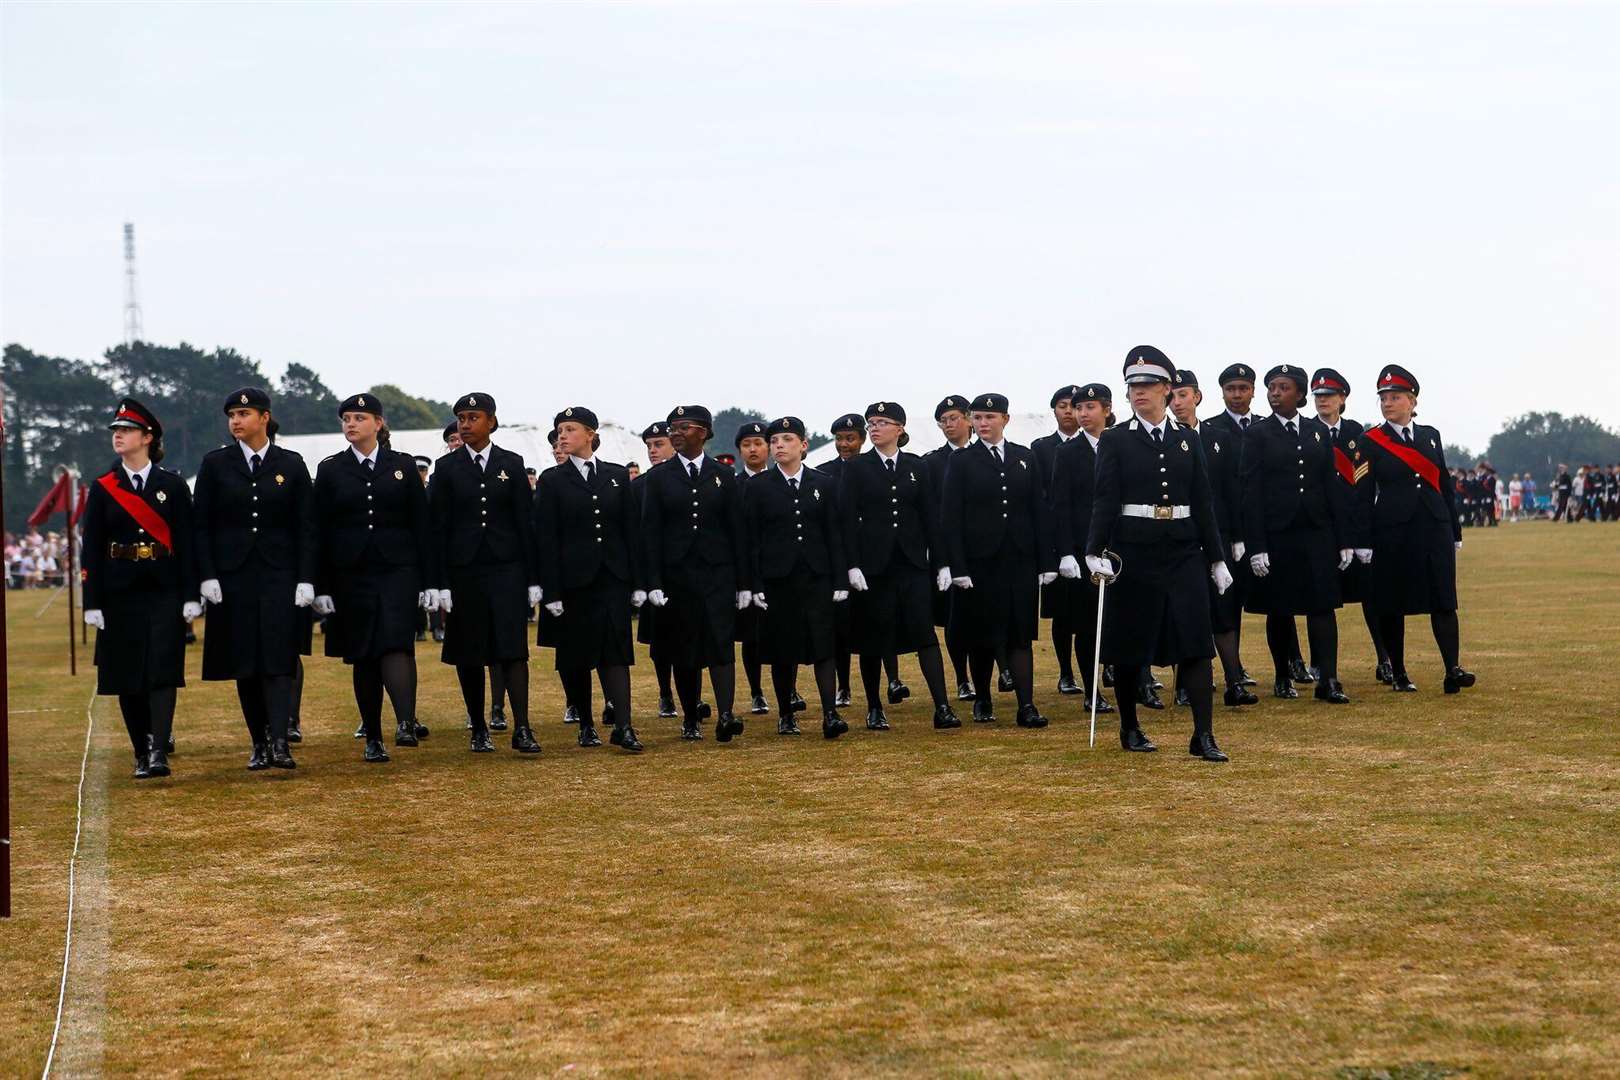 The yellowing grass illustrated the hot, dry weather, but the students kept their composure. Picture courtesy of Duke of York's Royal Military School.